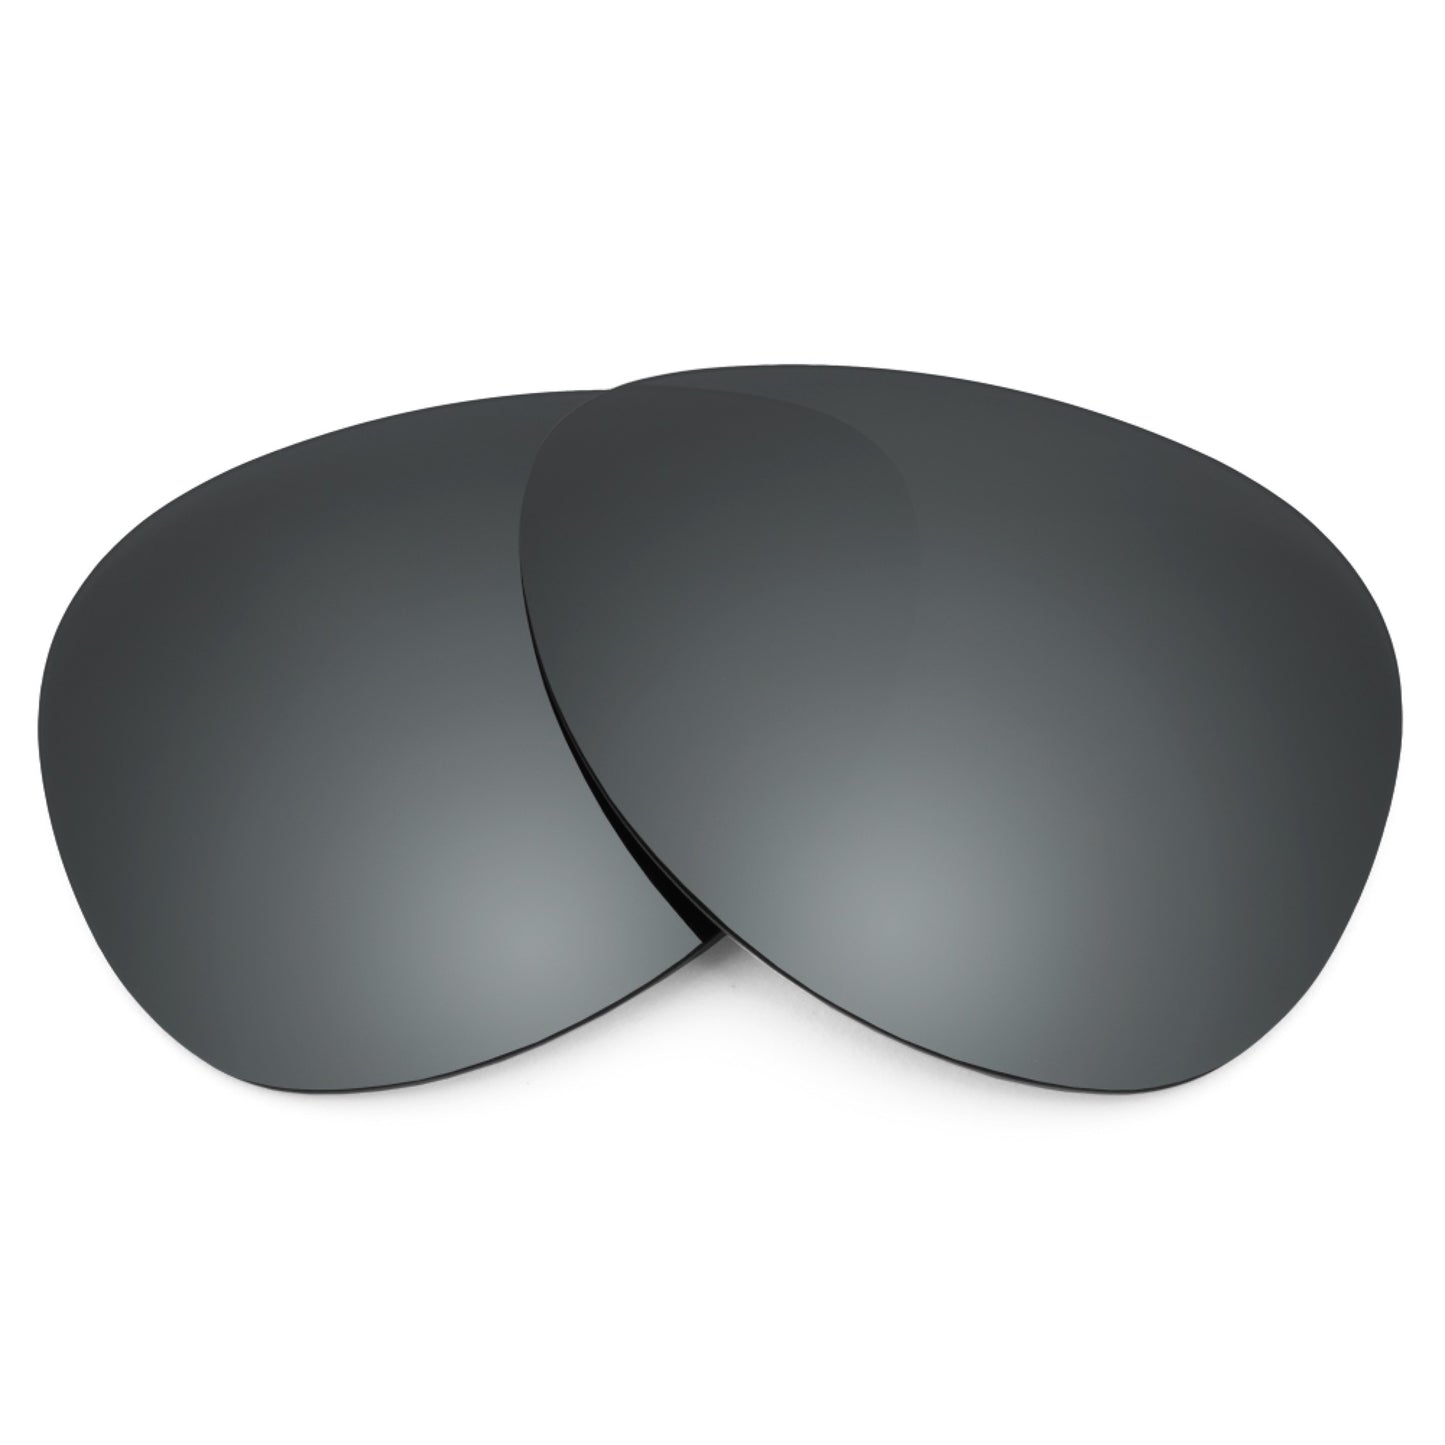 Revant replacement lenses for Ray-Ban Gatsby II RB4257 50mm Elite Polarized Black Chrome